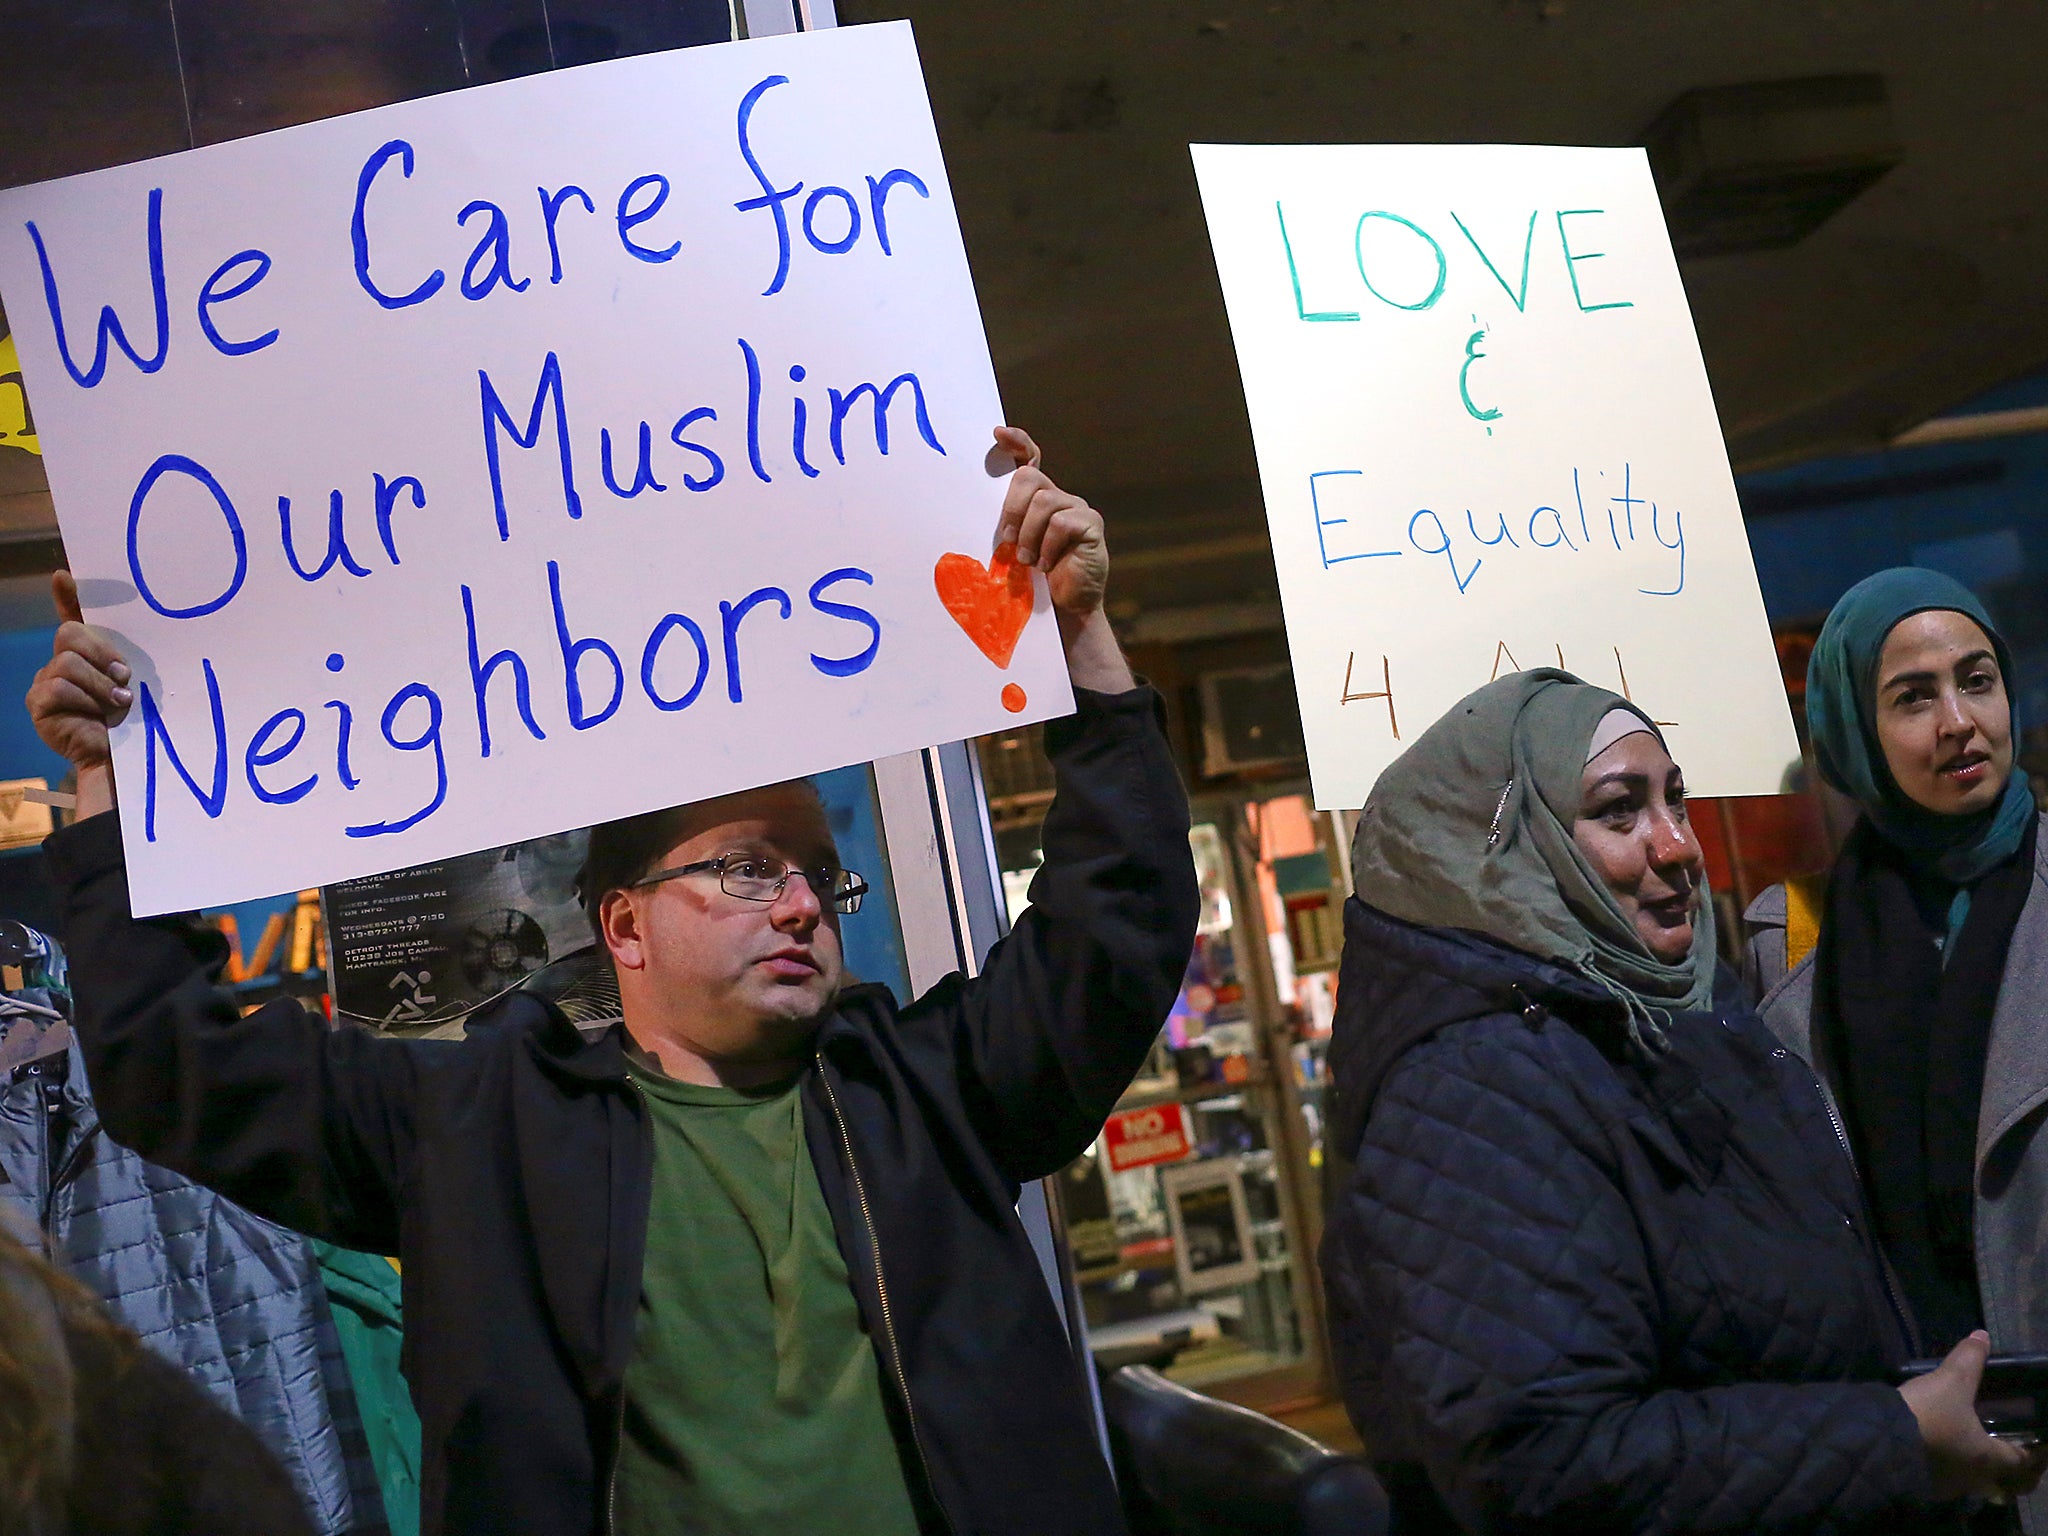 Demonstrators hold signs during a protest against President-elect Donald Trump and in support of Muslims residents in downtown Hamtramck, Michigan, U.S.